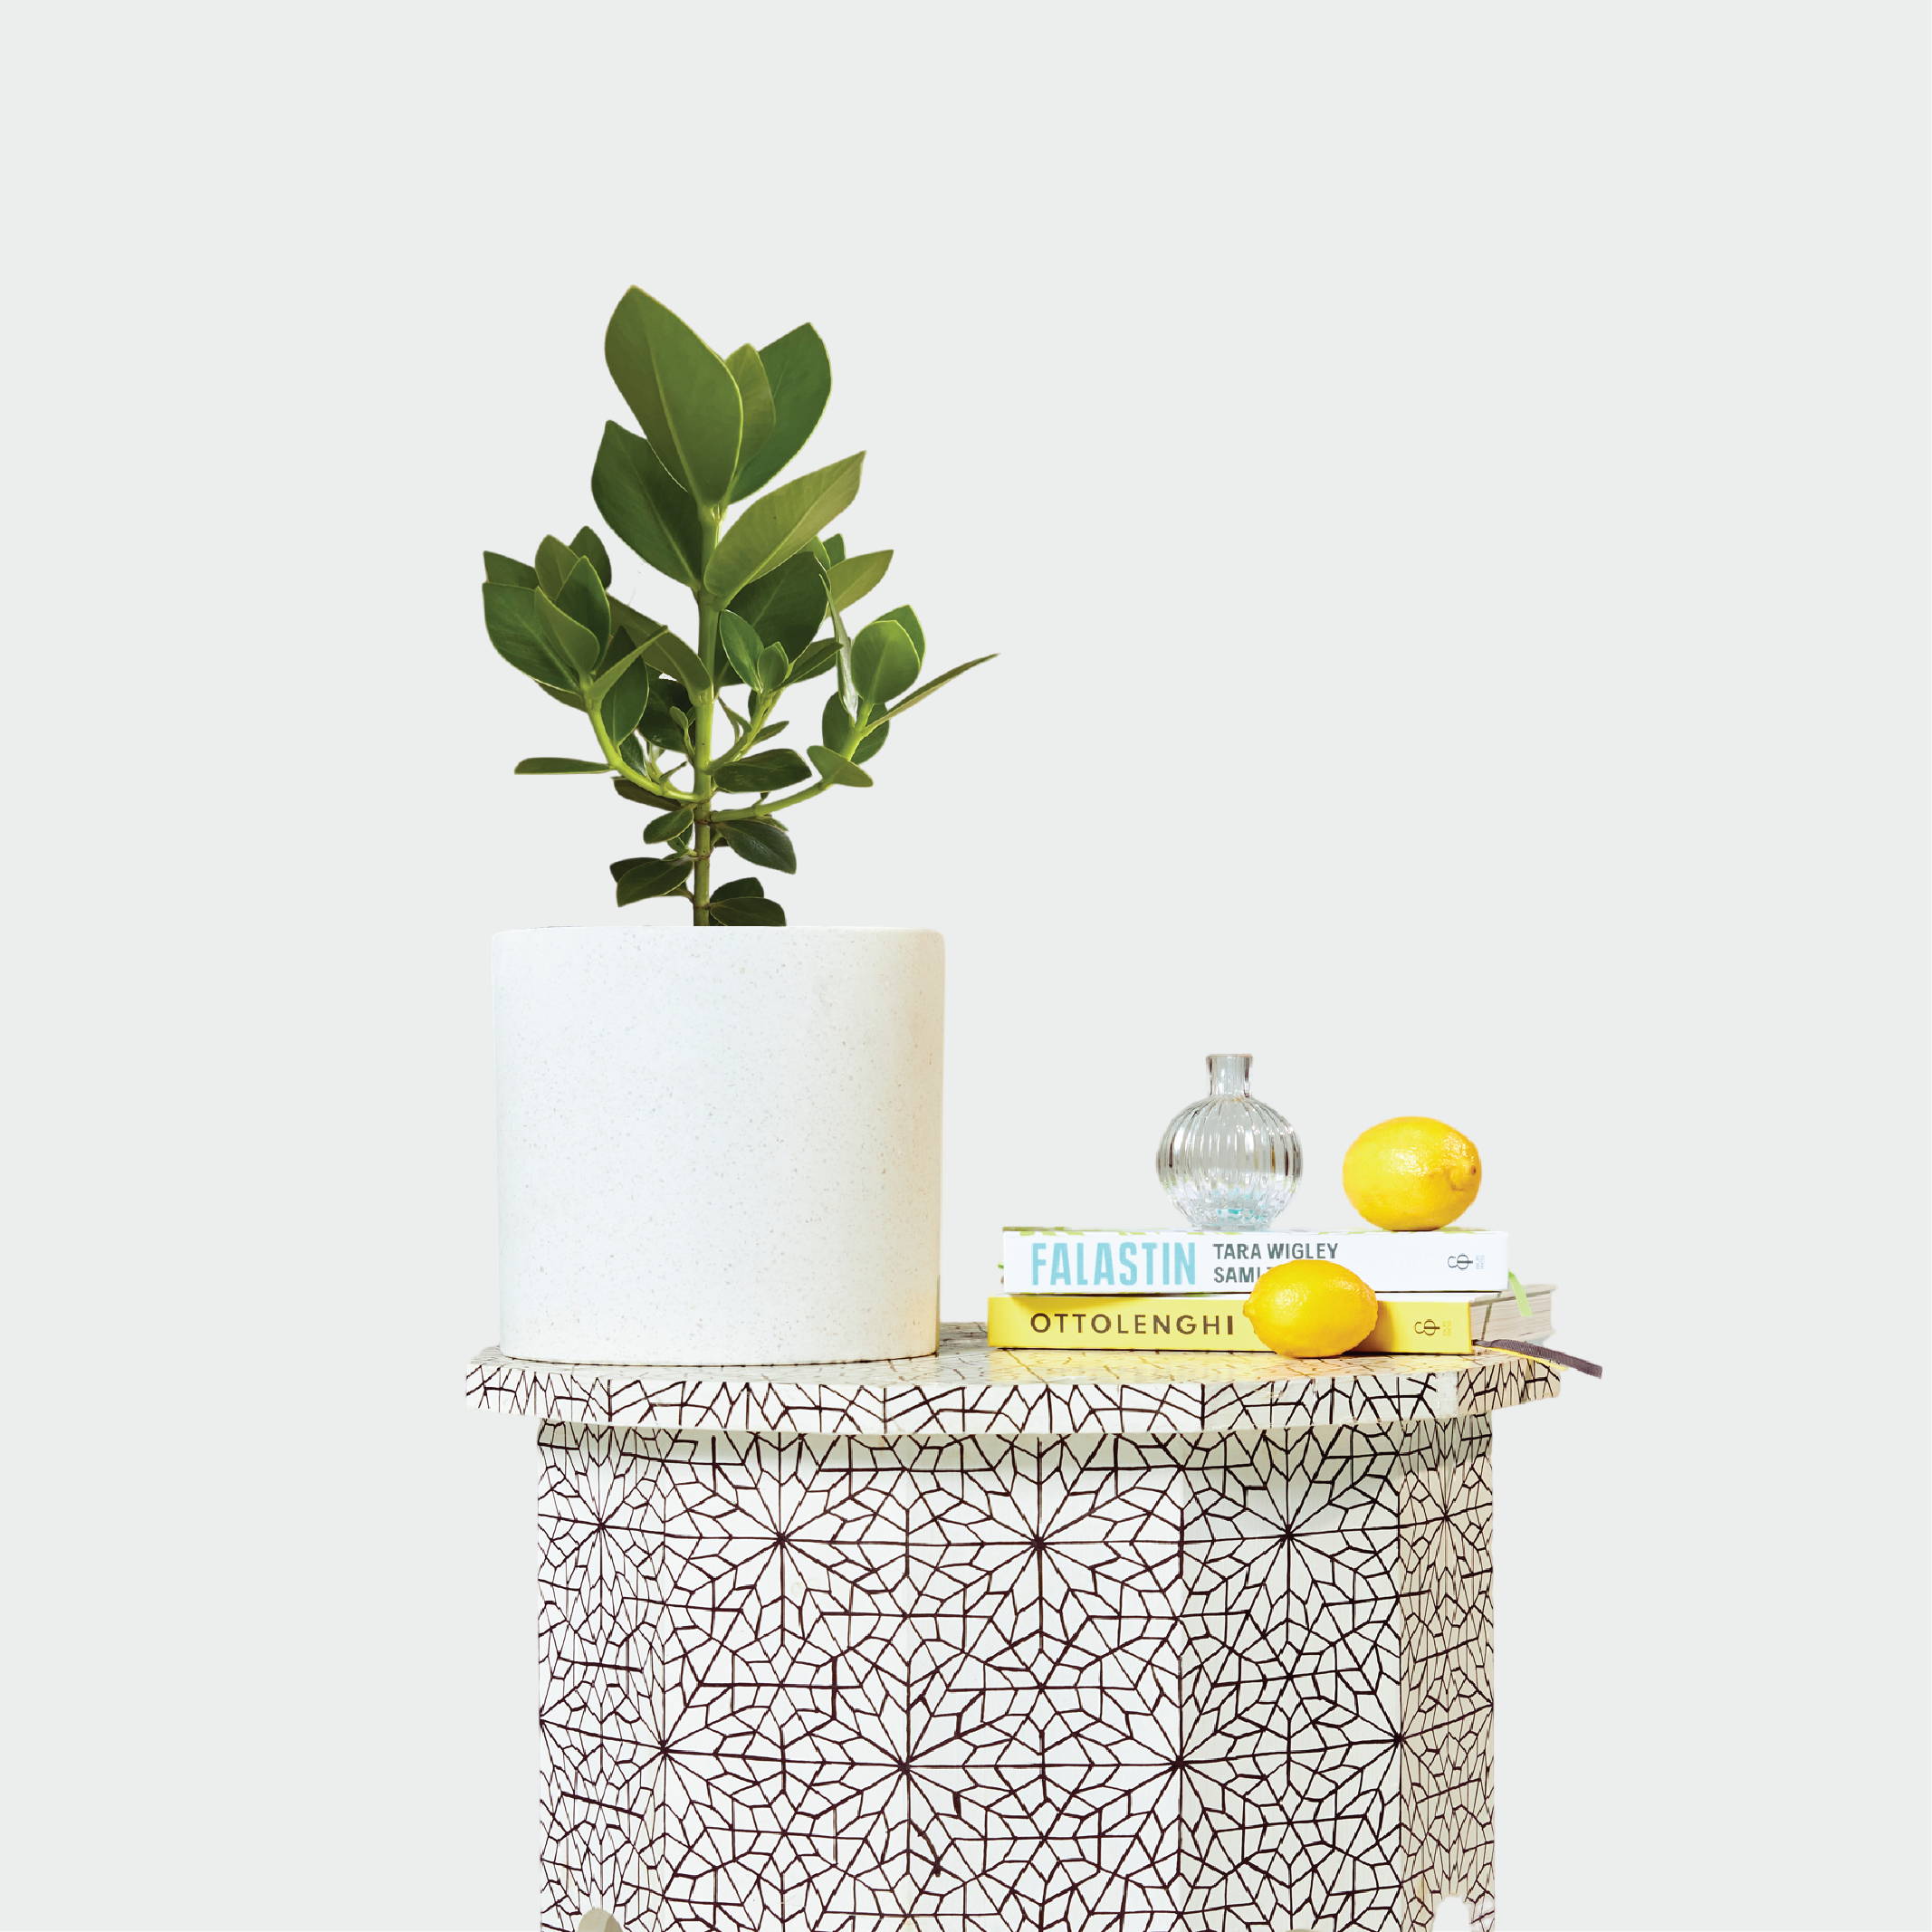 Autograph Tree in Jardin Terrazzo Pot White on Morocco table at The Good Plant Co